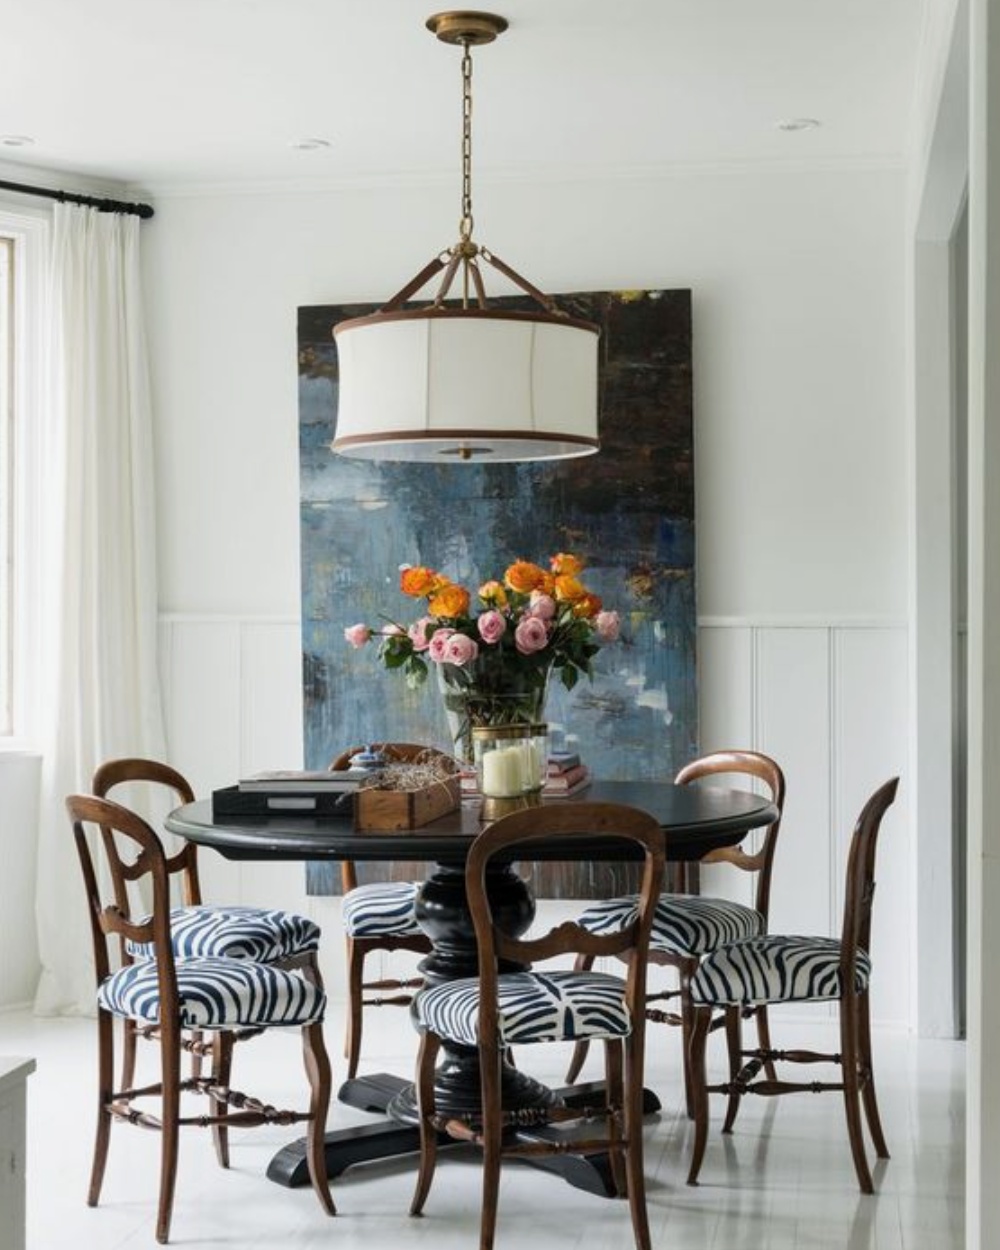 How to introduce antique seating options into any space